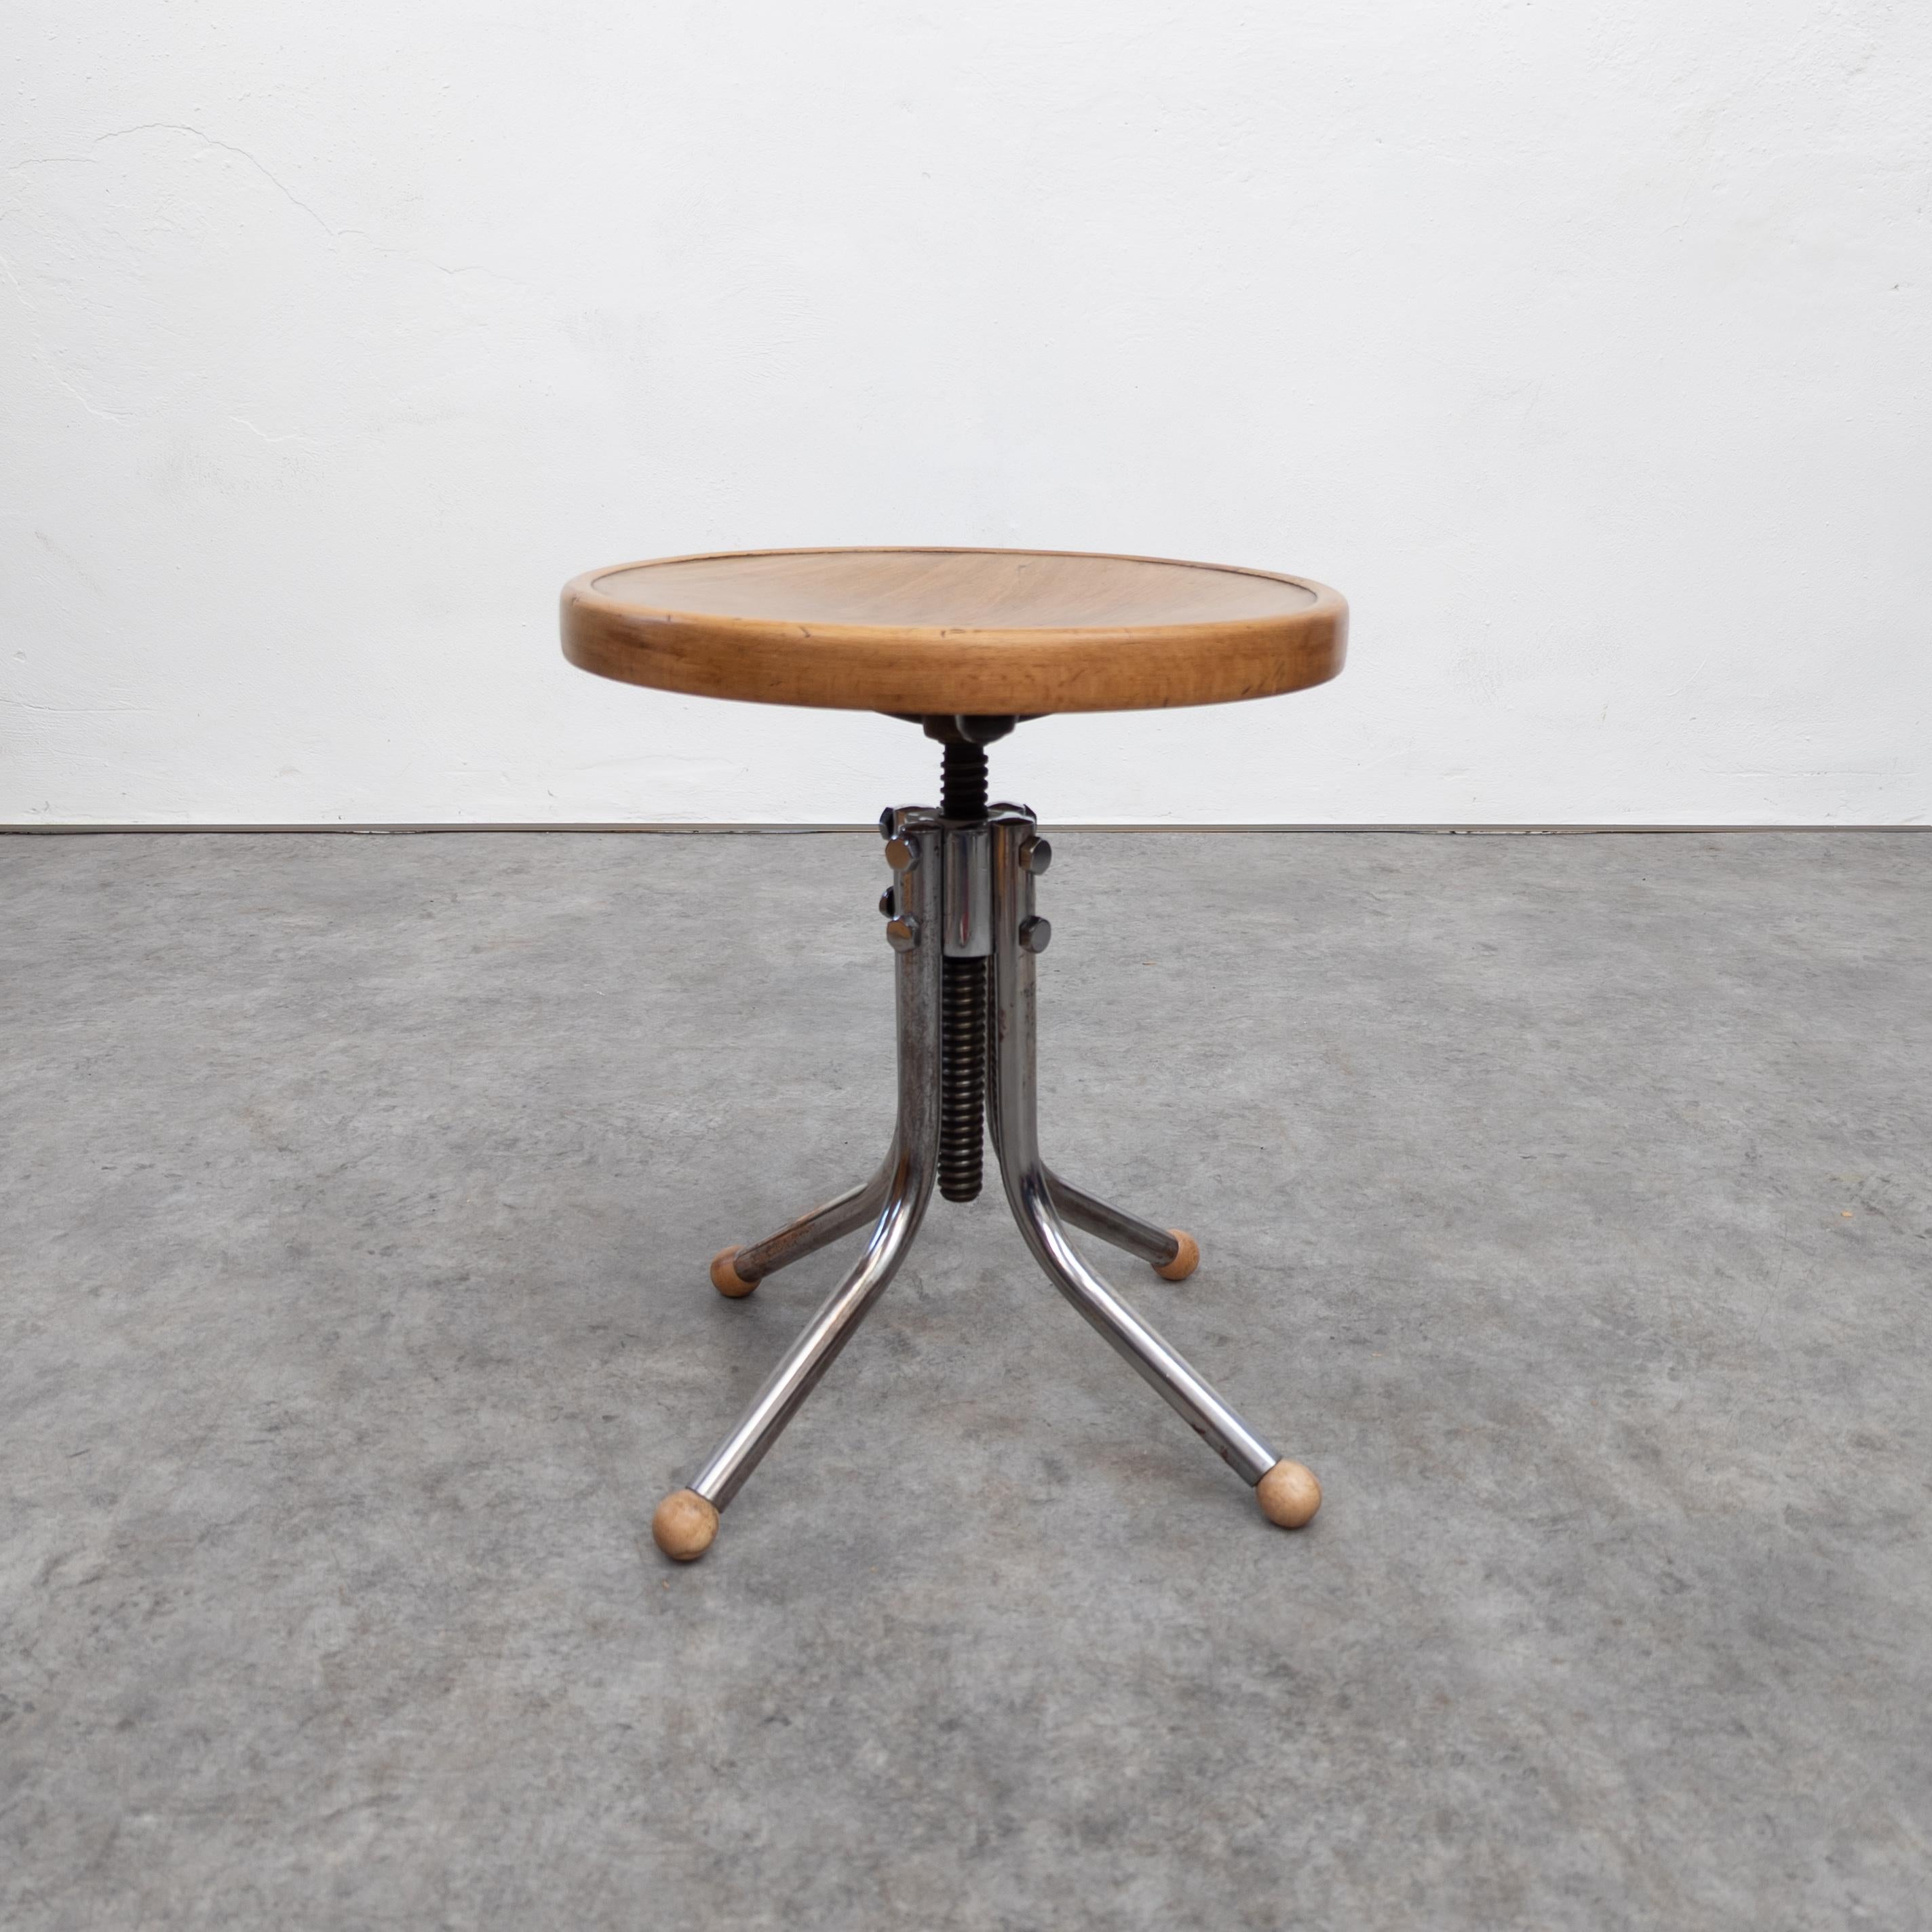 Mid-20th Century A rare variant of stool mod. no. B 195, designed by Marcel Breuer For Sale